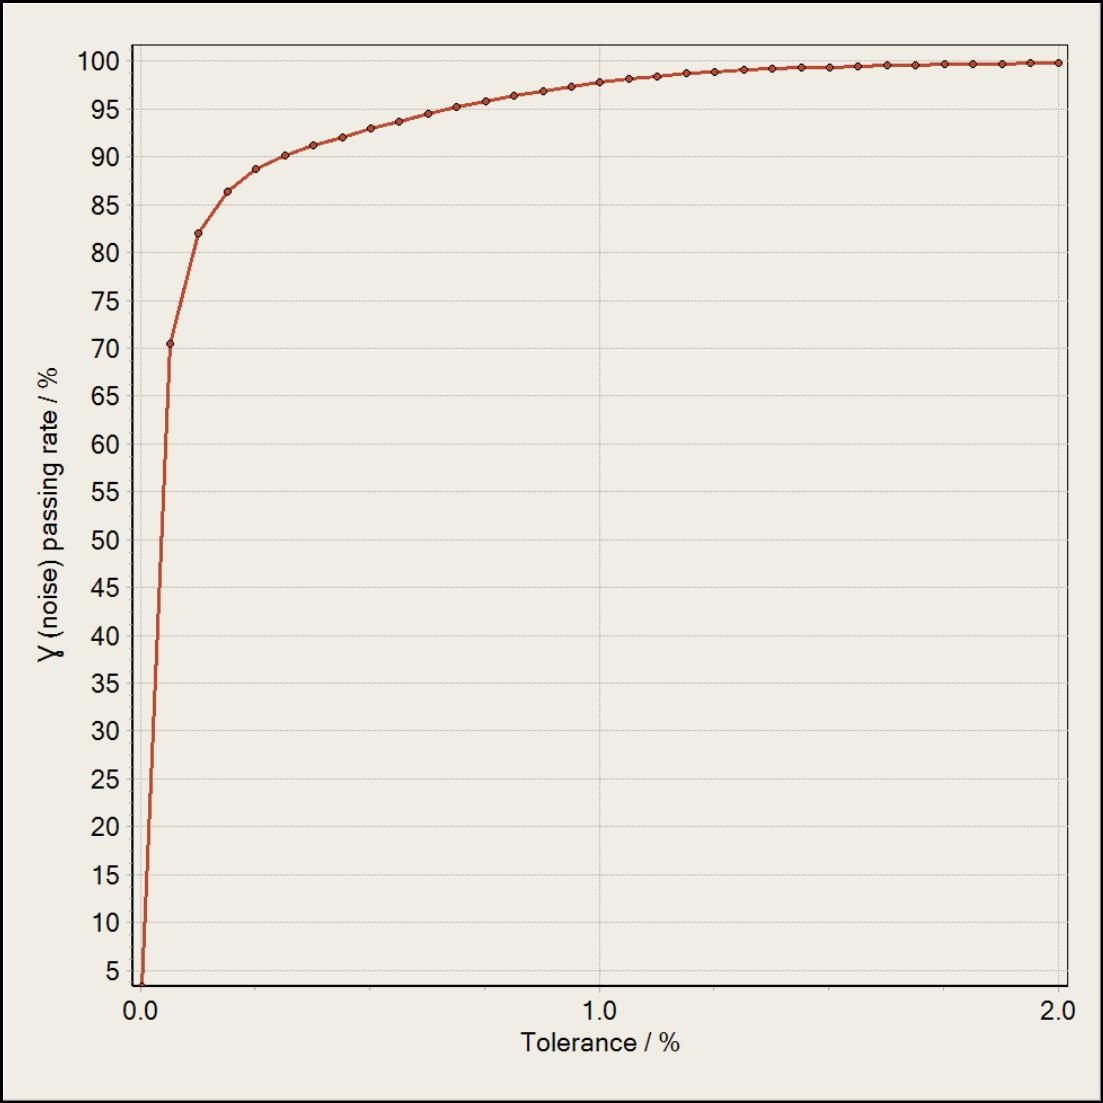 Chart showing the passing rate as a function of tolerance for constant distance εdist = 2 mm.